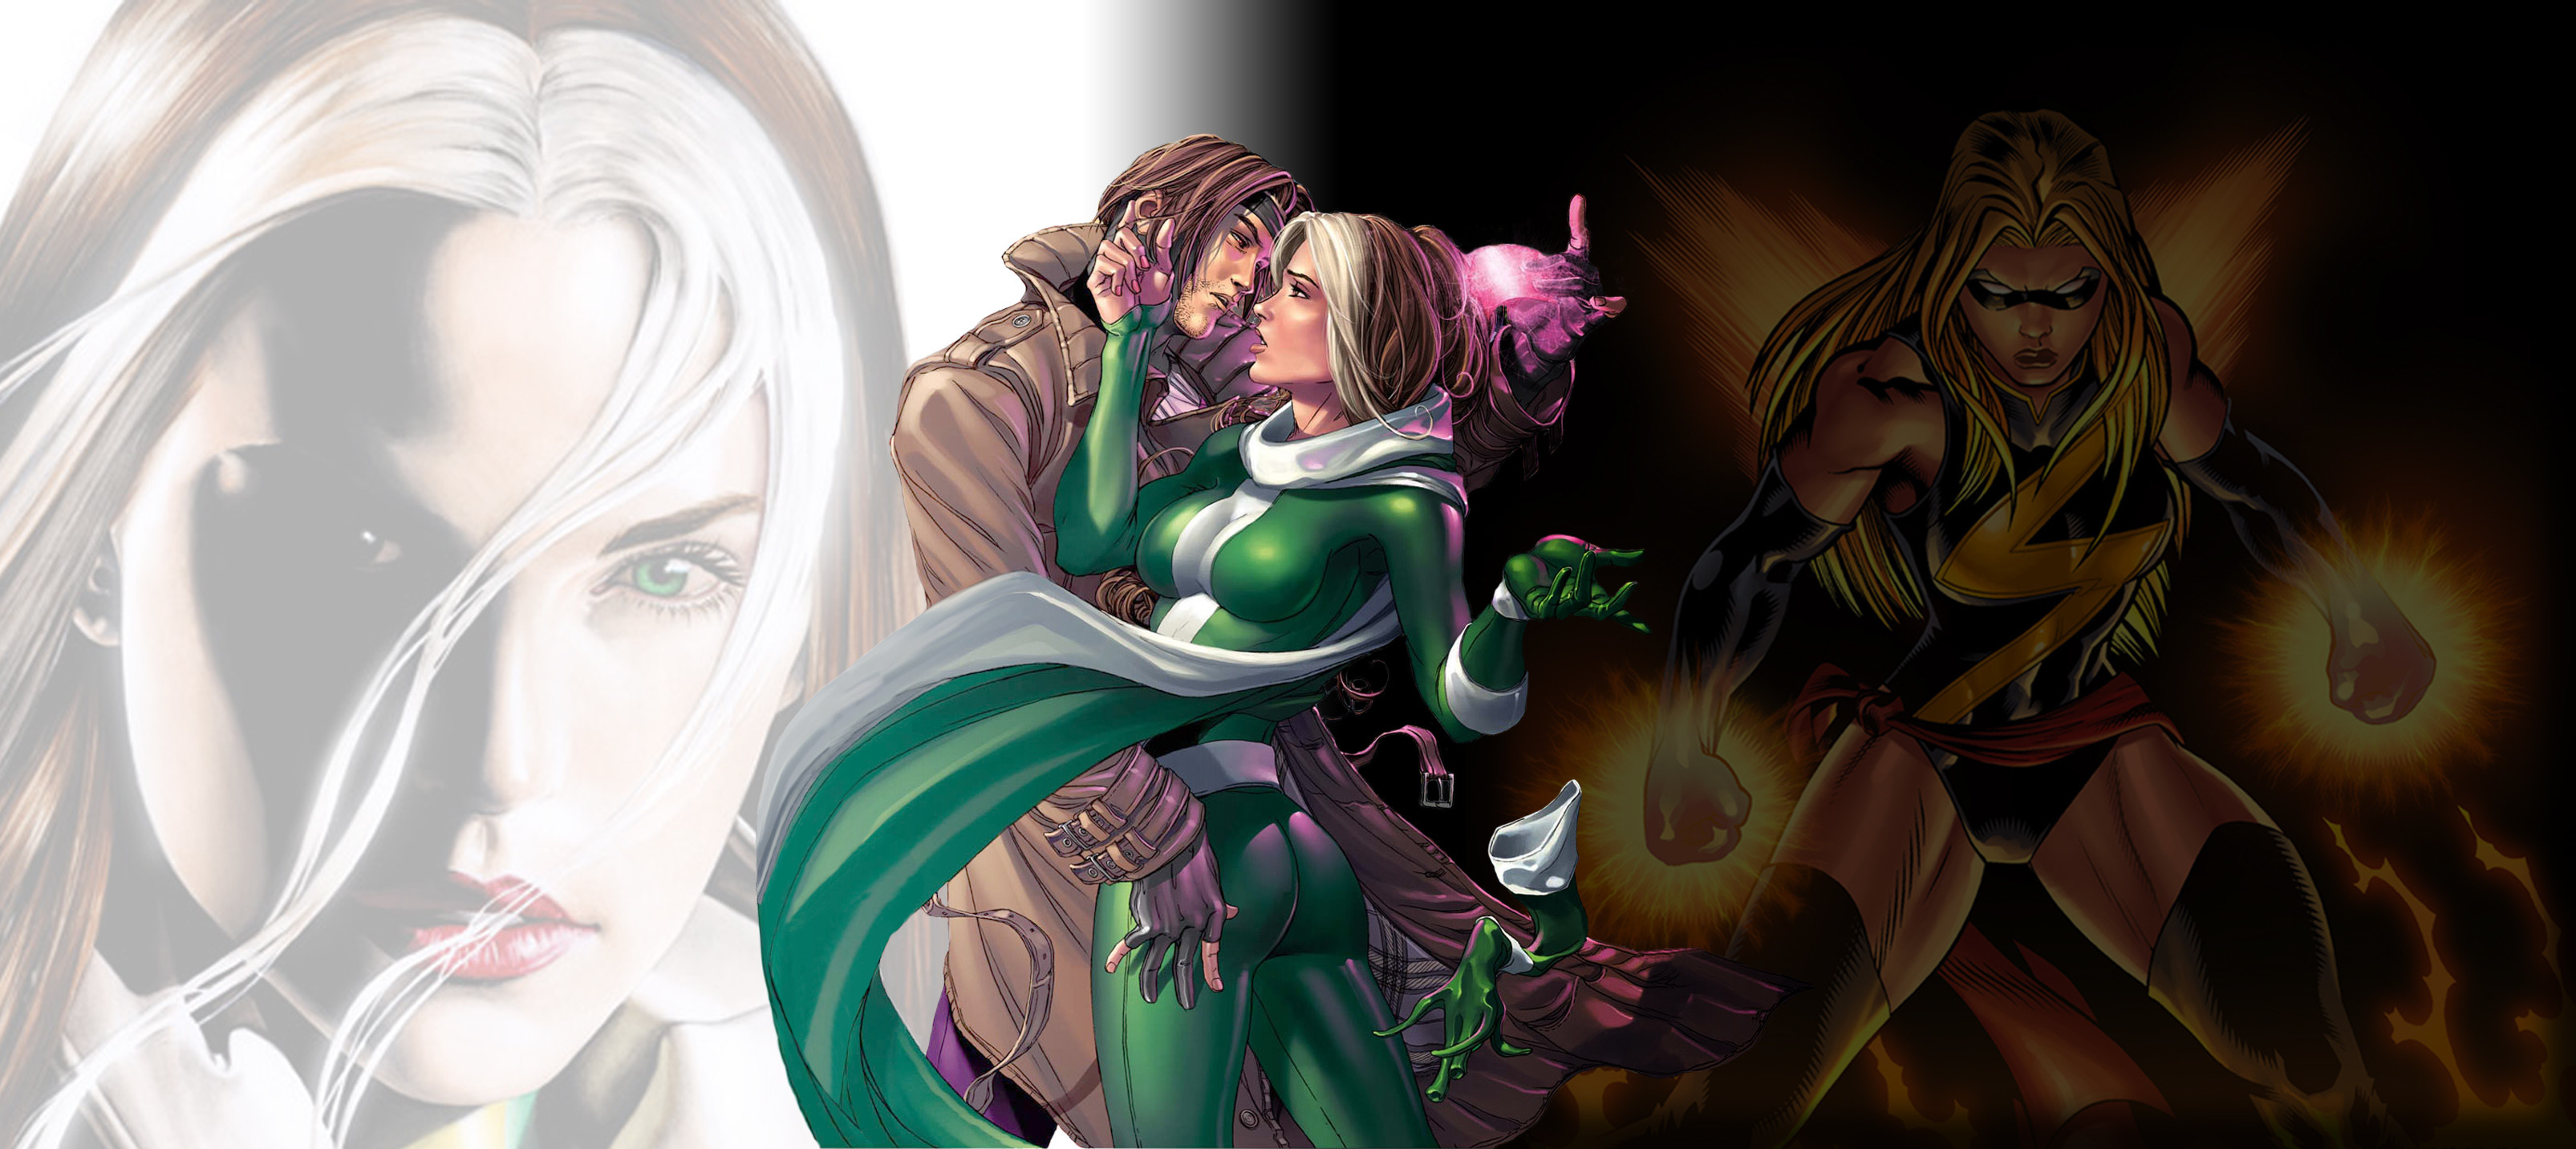 3211x1432 Rogue and Gambit wallpaper by lucida-lownes on DeviantArt ...